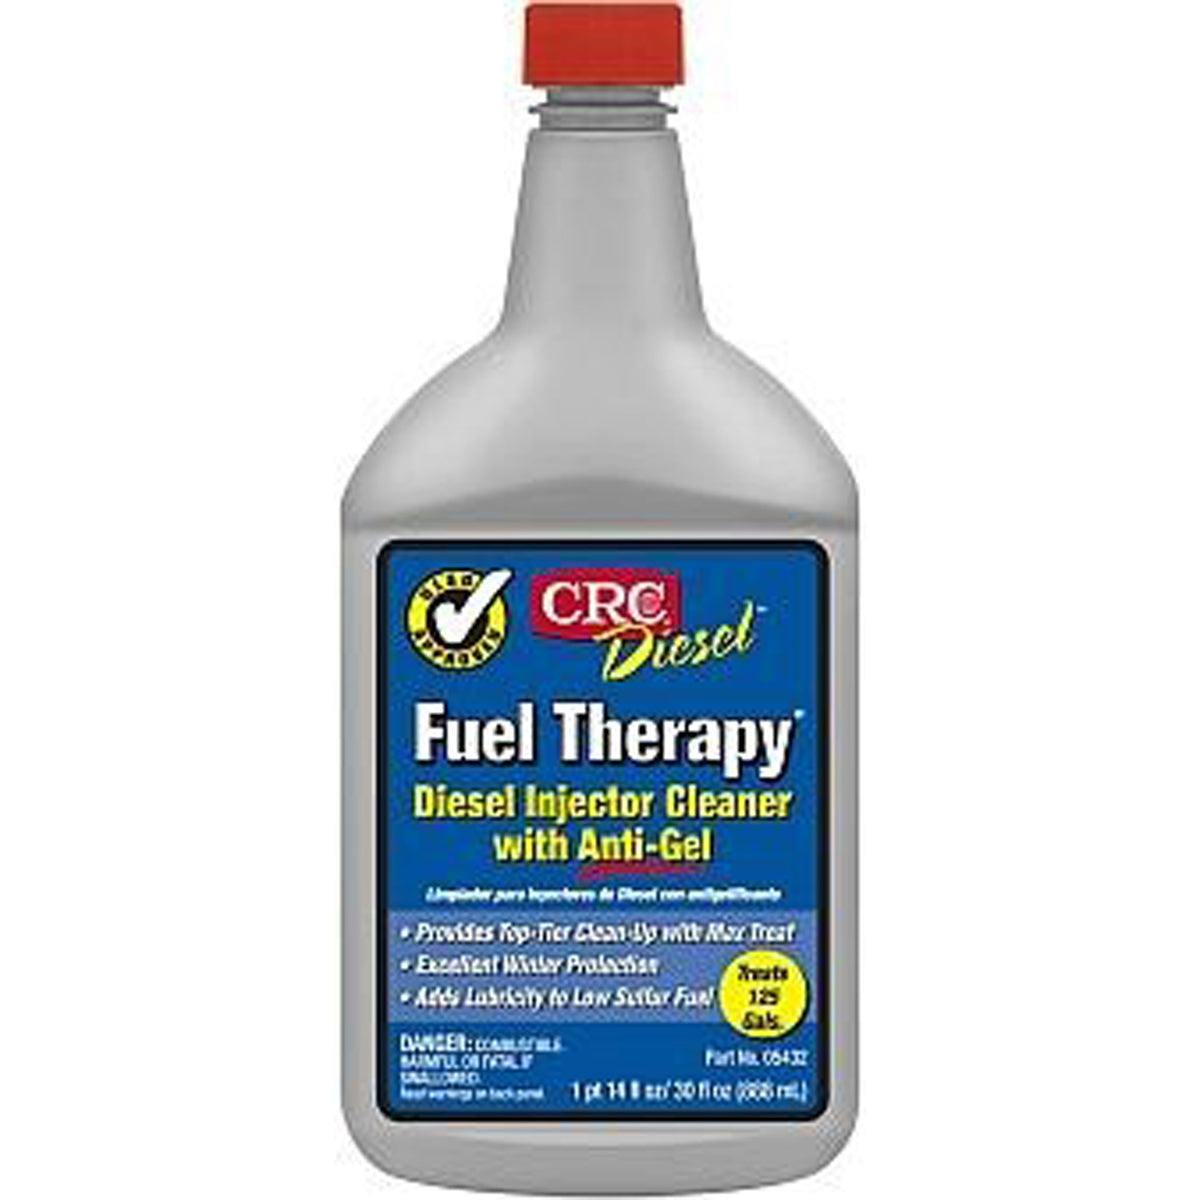 CRC 05432 Fuel Therapy Diesel Injector Cleaner with Anti-Gel - 30 oz.